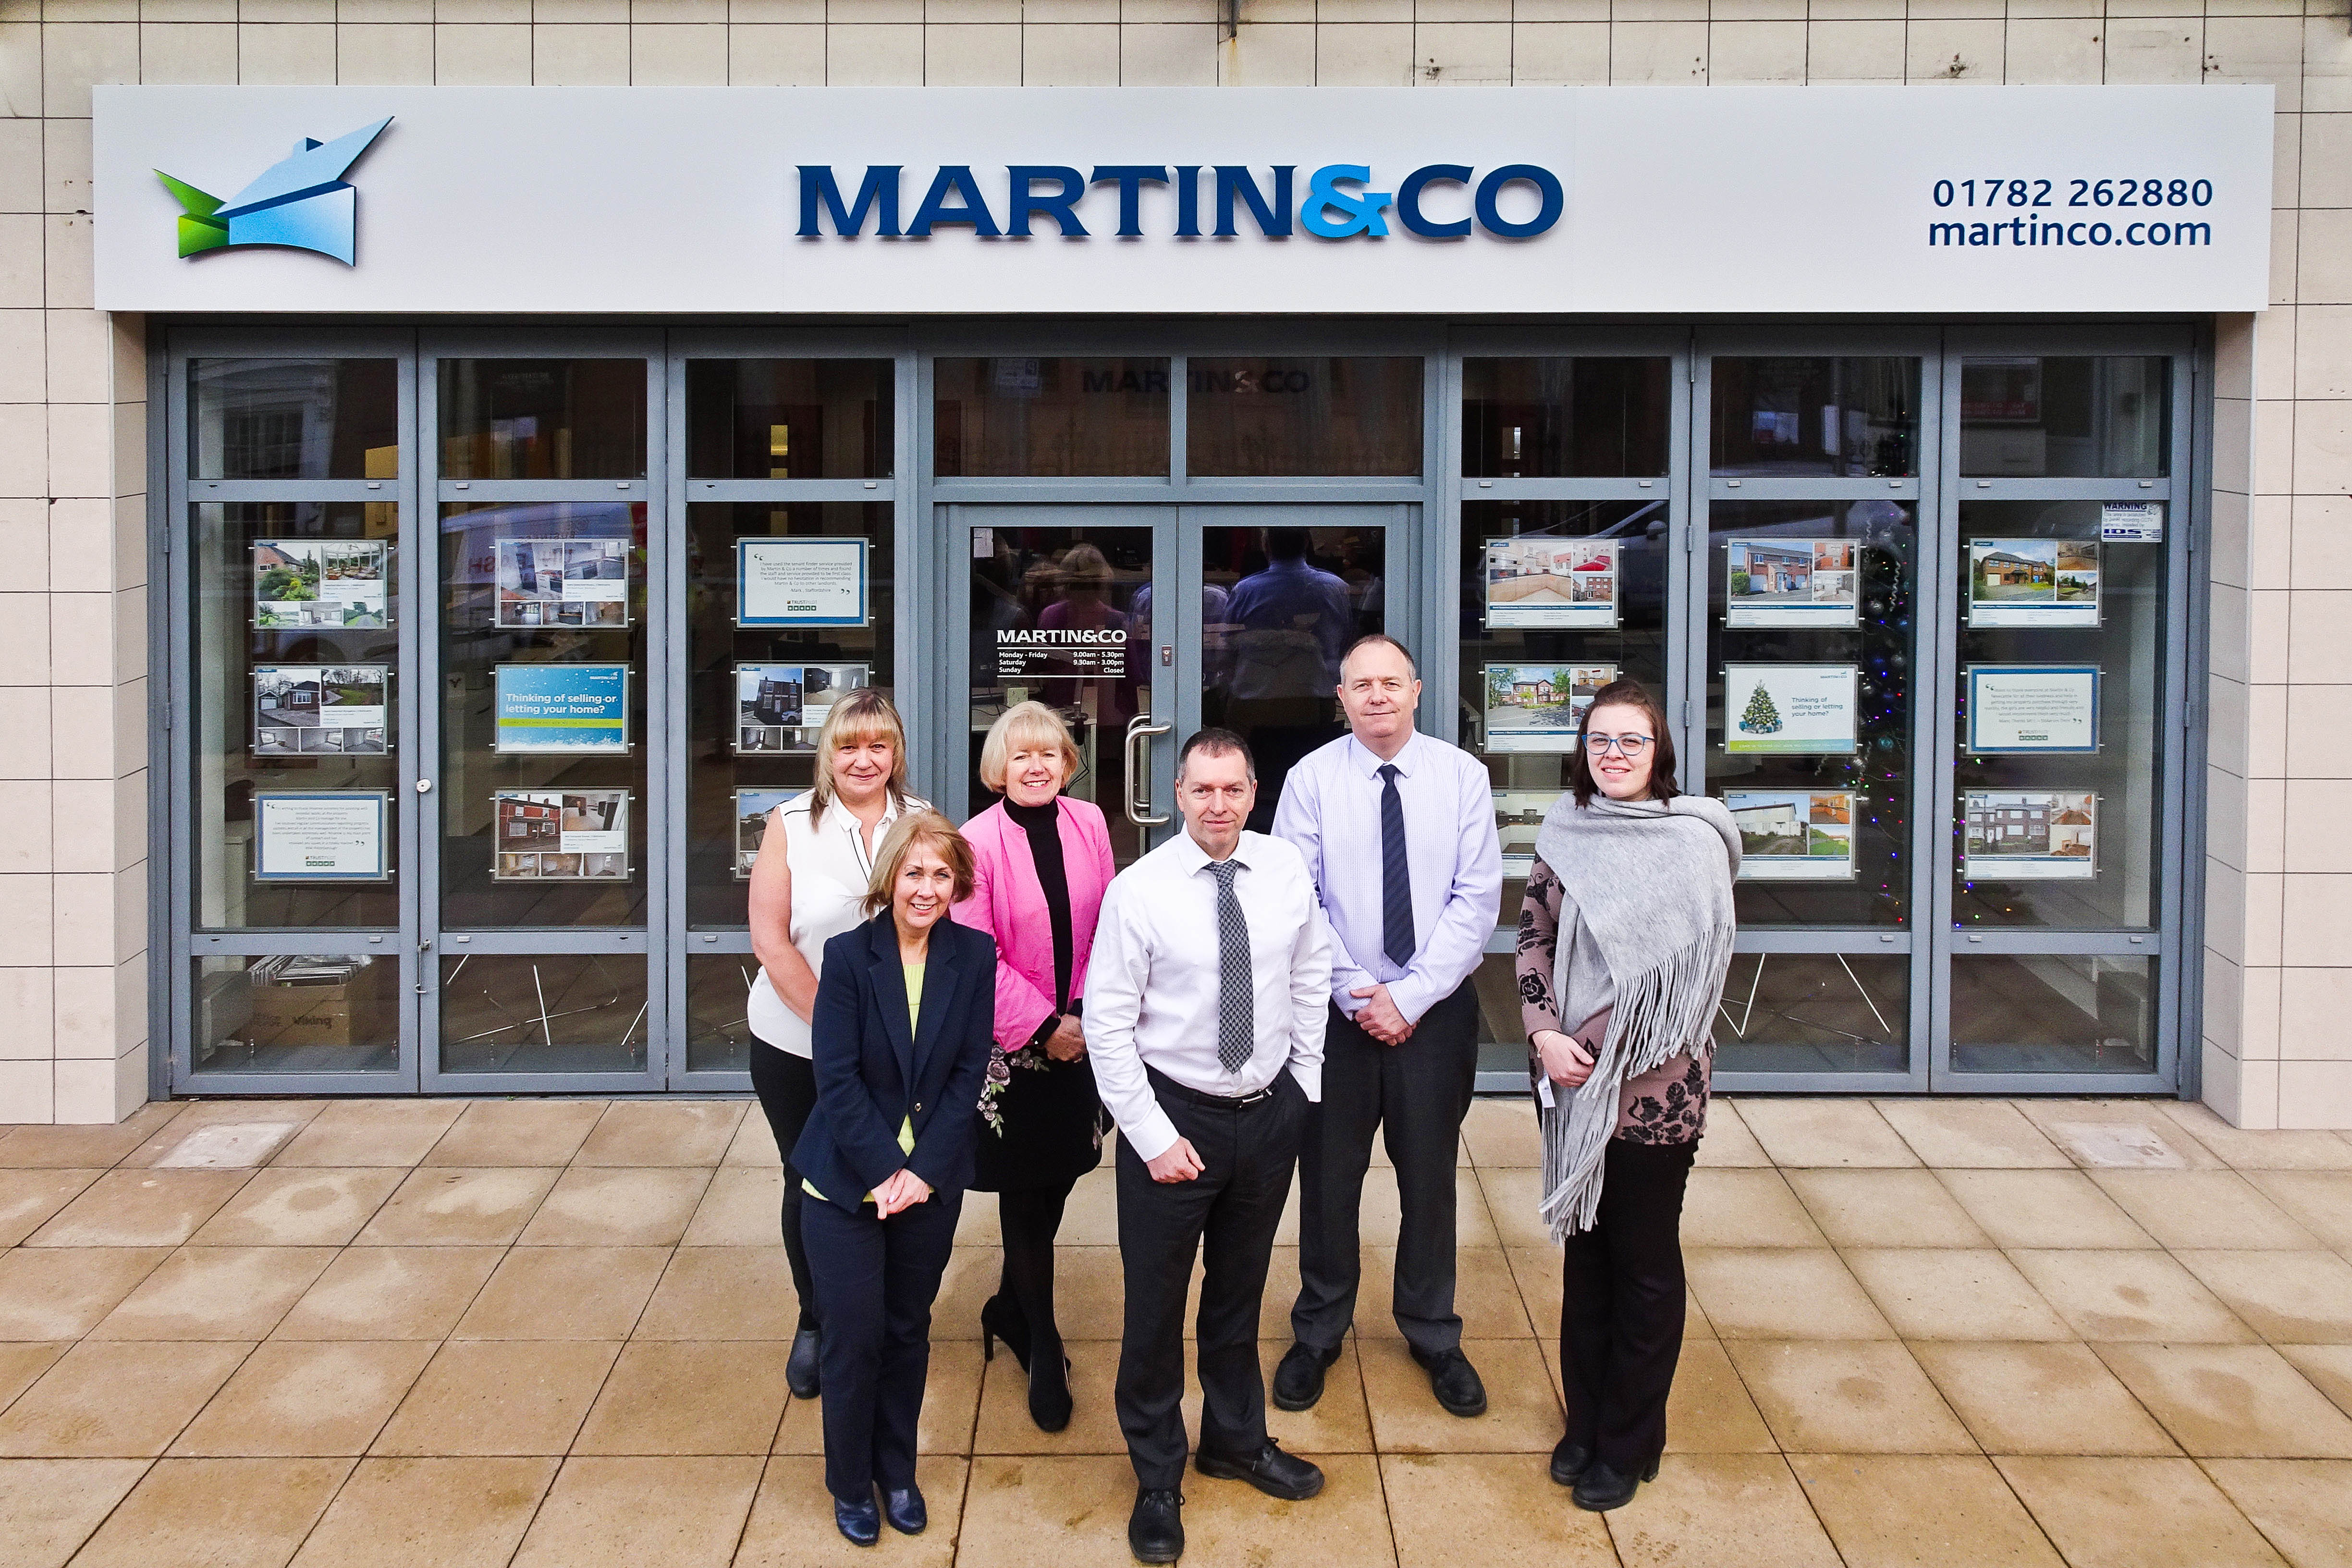 Martin & Co Stoke on Trent Lettings & Estate Agents Staffordshire 01782 262880